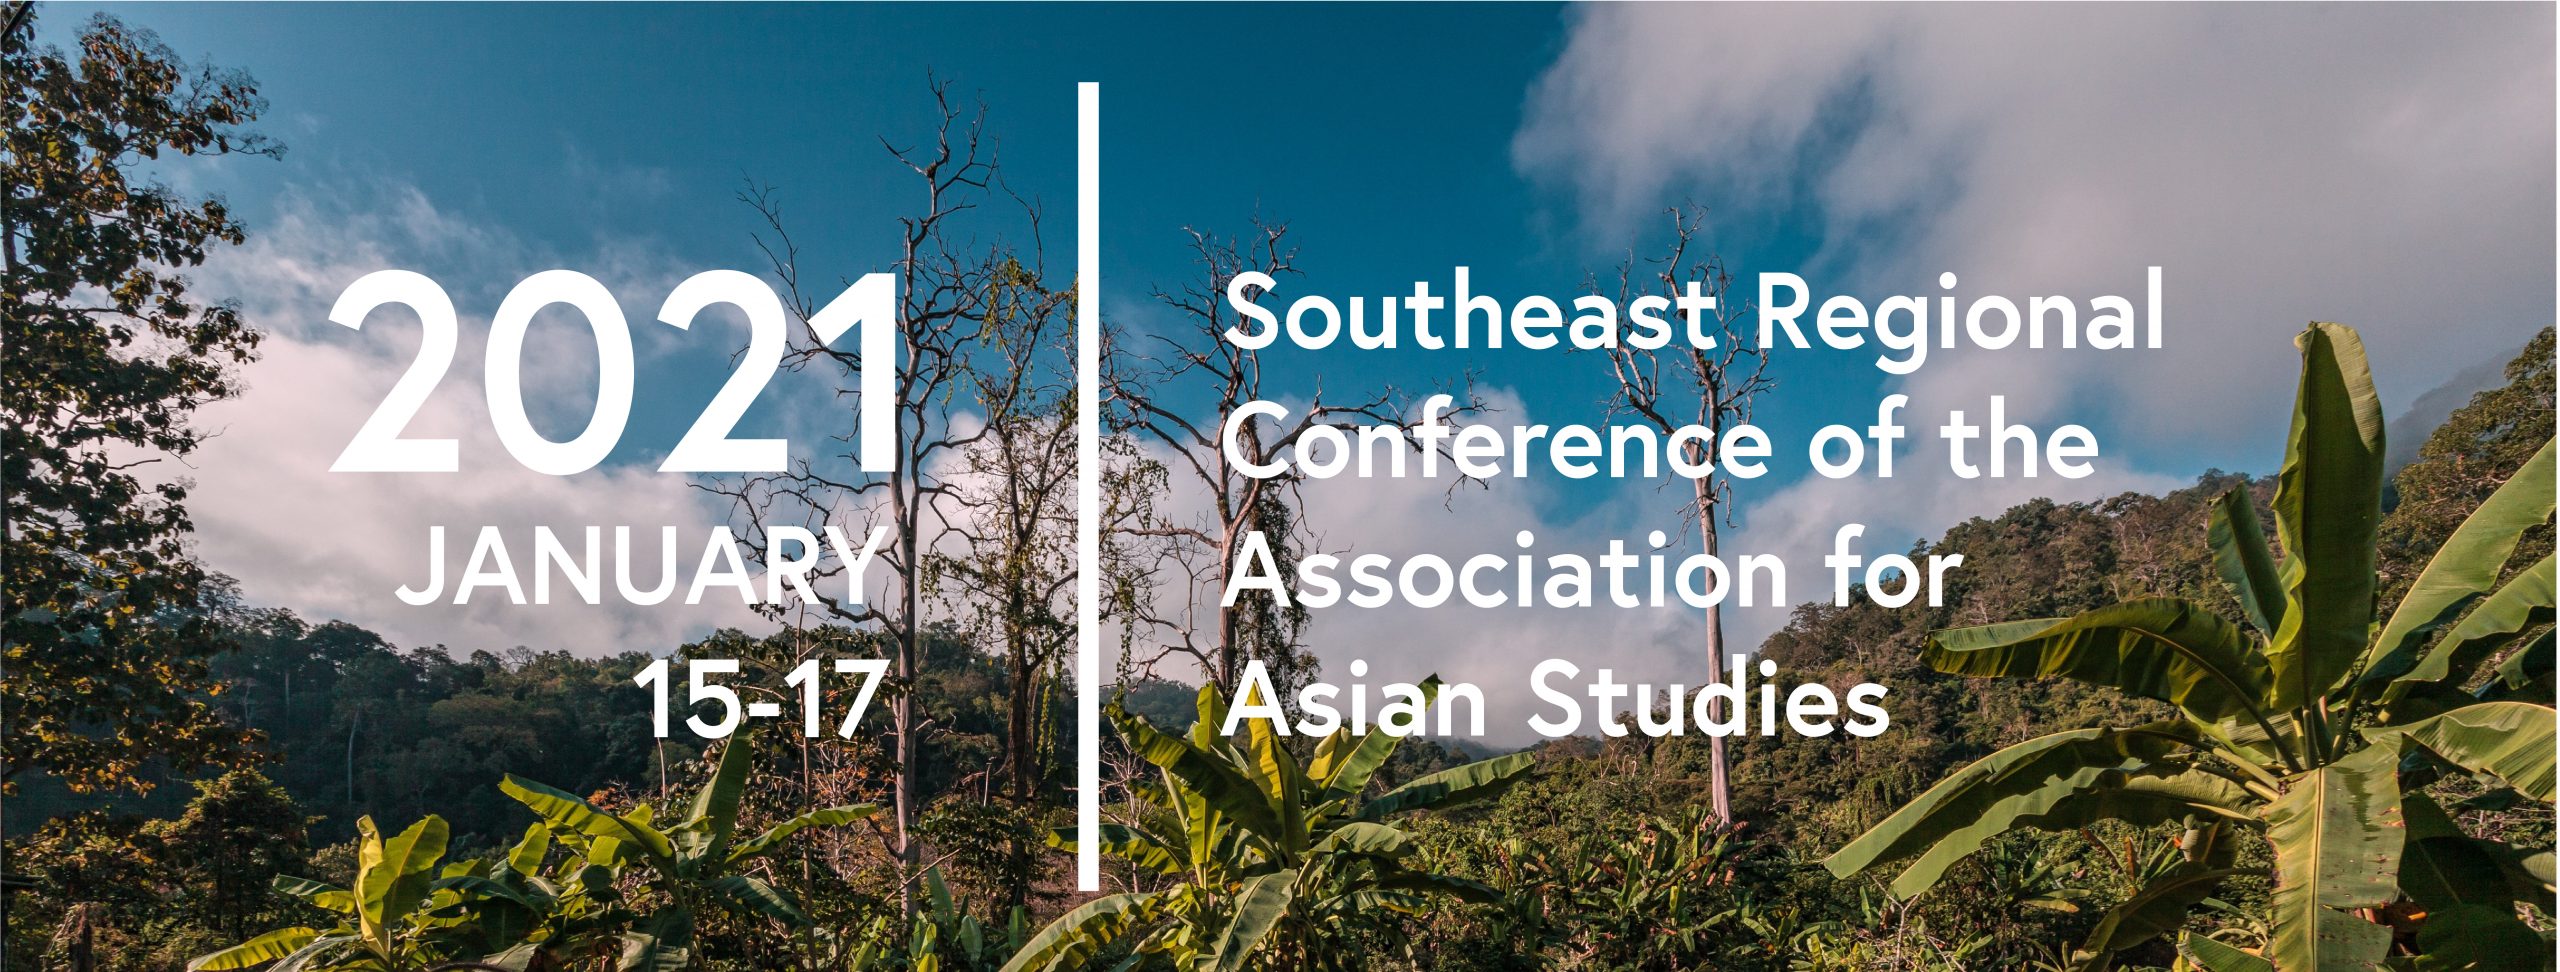 2021 Southeast Regional Conference of the Association for Asian